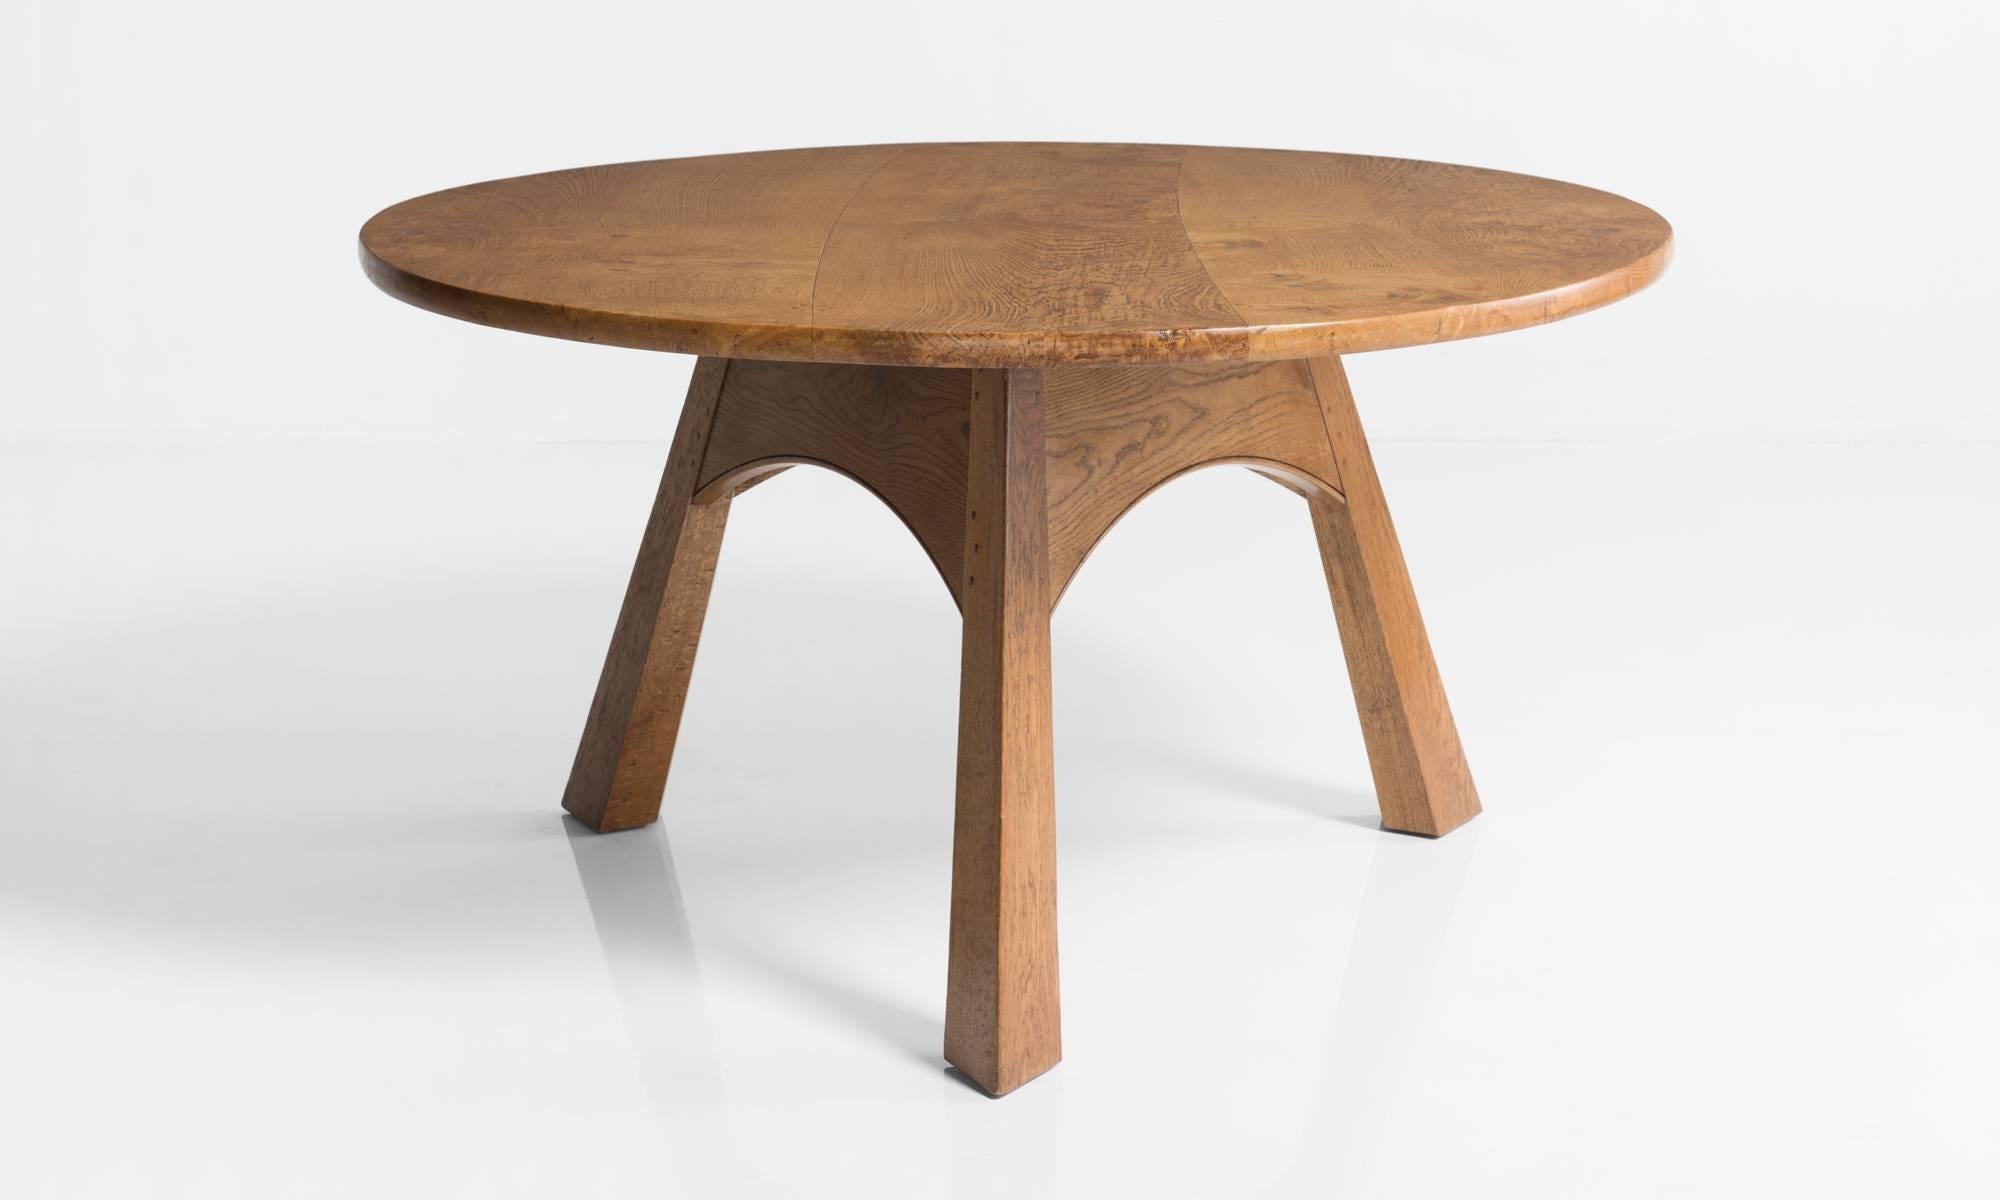 Round Oak Dining Table, made in England circa 1930.

Generous sized, elegant dining table in the Cotswold style with a triform base.